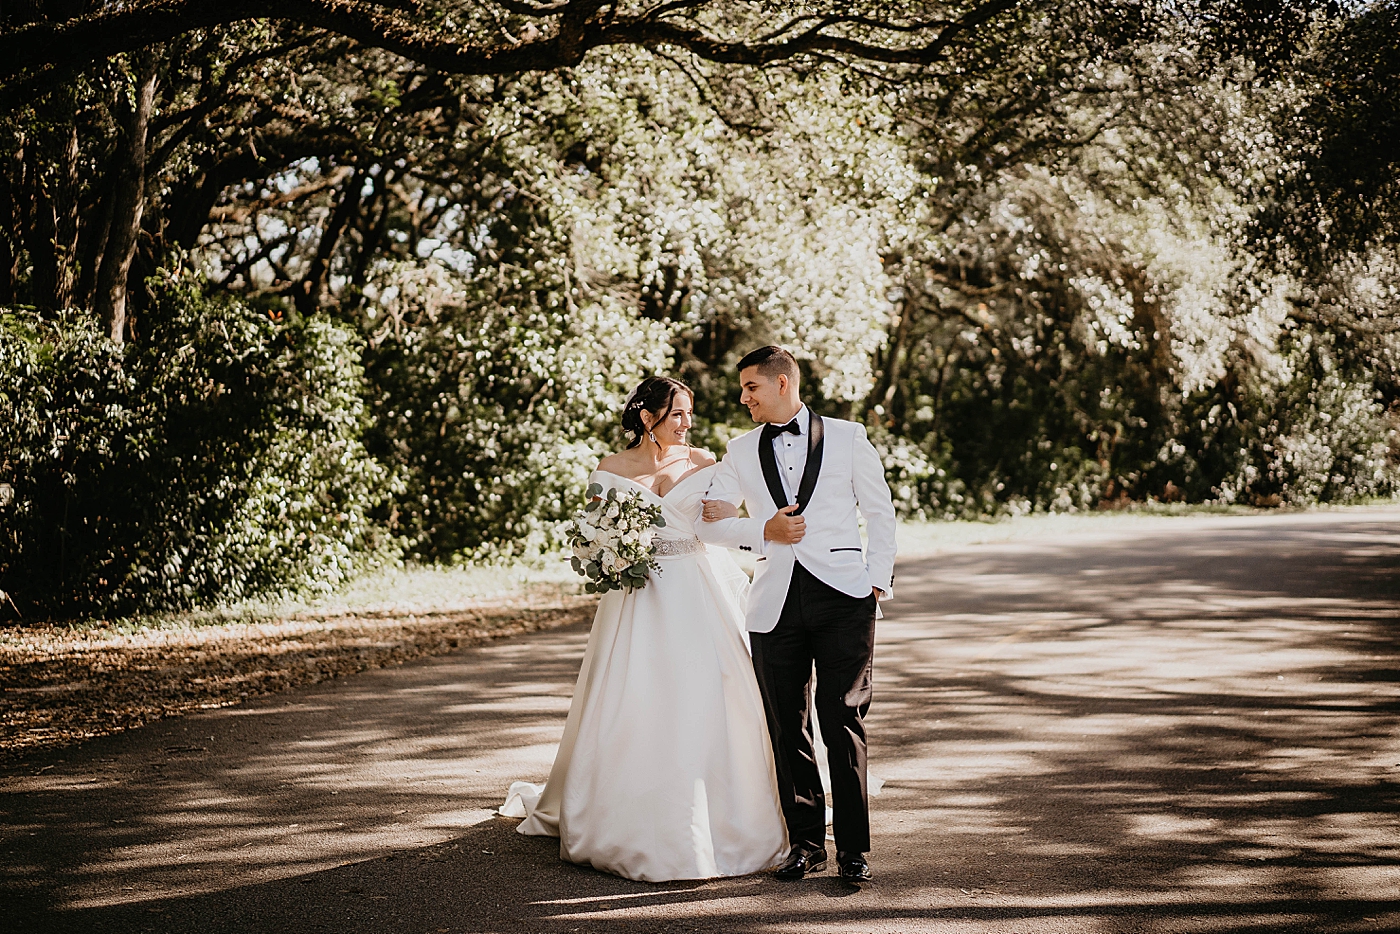 Bride and Groom with intertwined arms walking together Lavan Venue Wedding Photography captured by South Florida Wedding Photographer Krystal Capone Photography